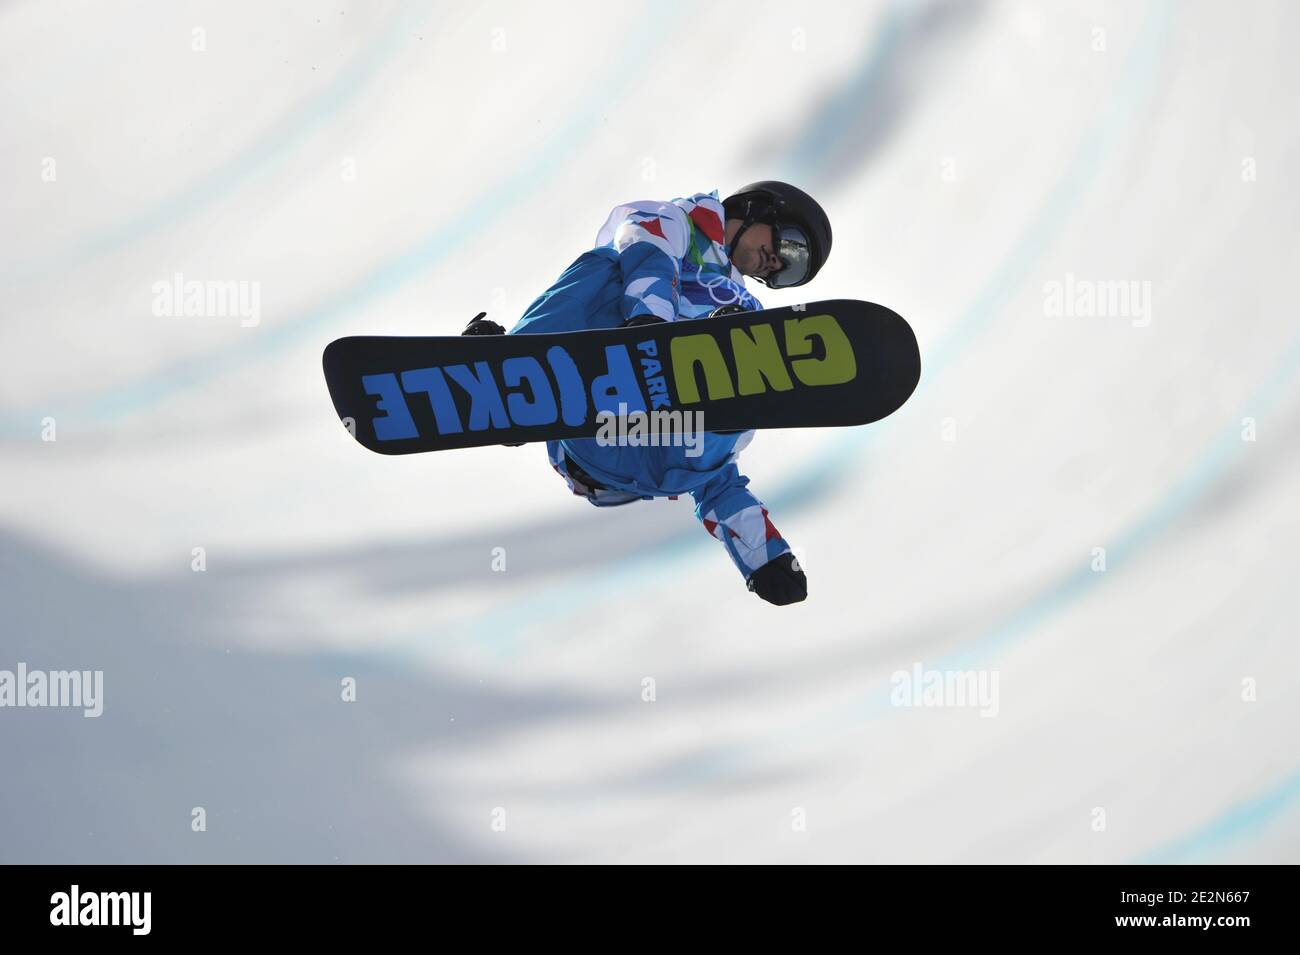 Mathieu Crepel competes in the men's Snowboard Halfpipe Qualify session on  February 17, 2010 at Cypress